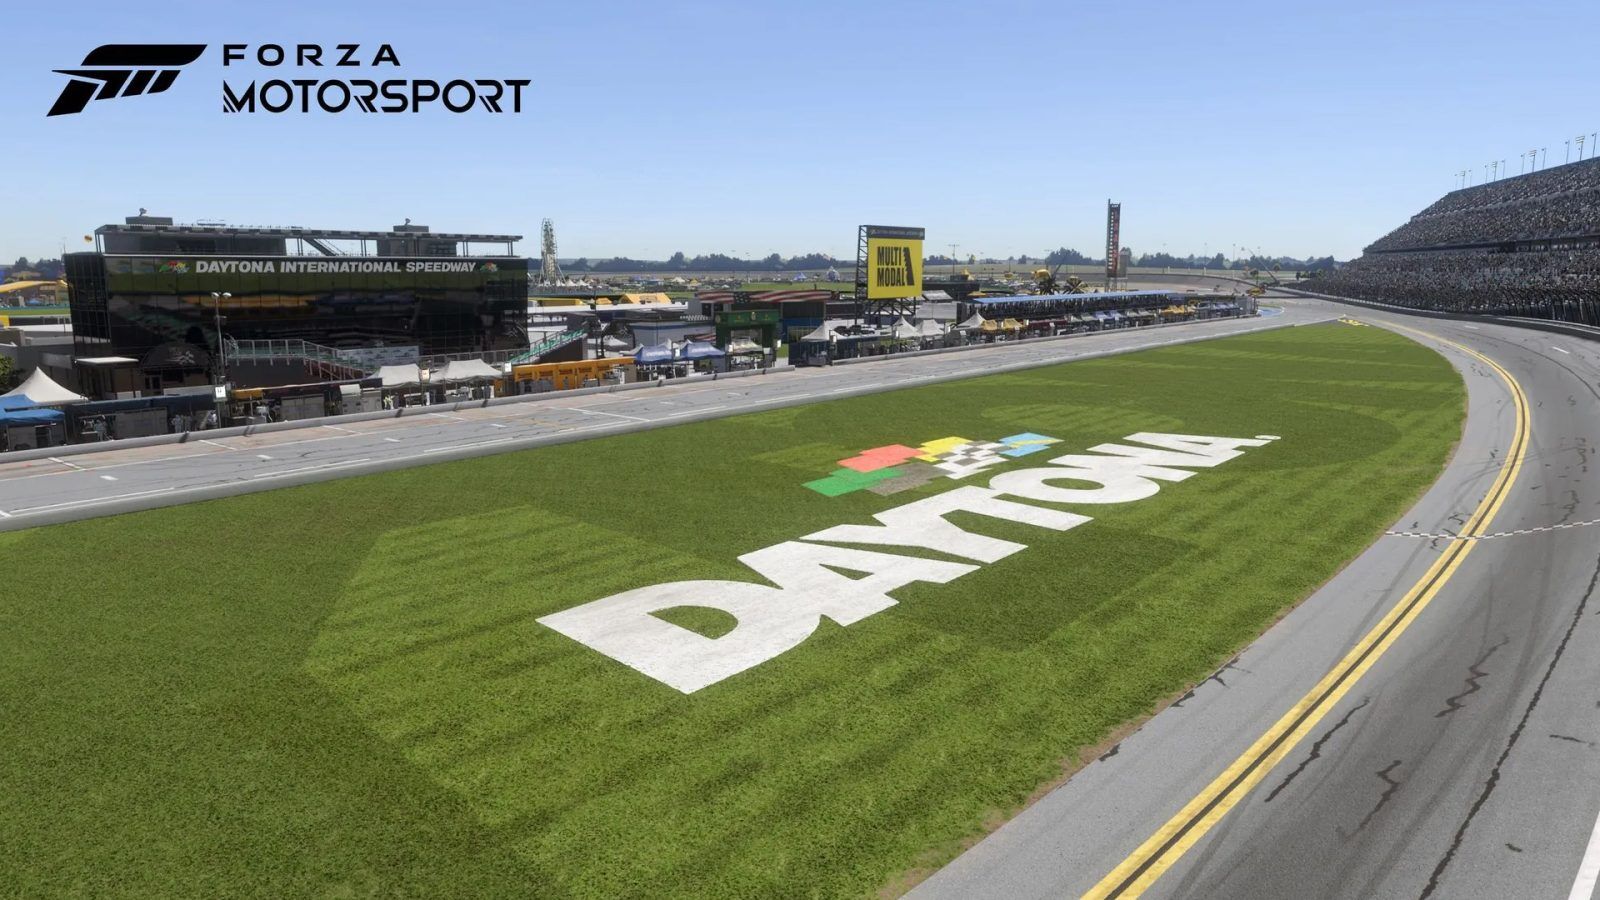 Forza Motorsport - Daytona and 10 New Cars Set For Update 4